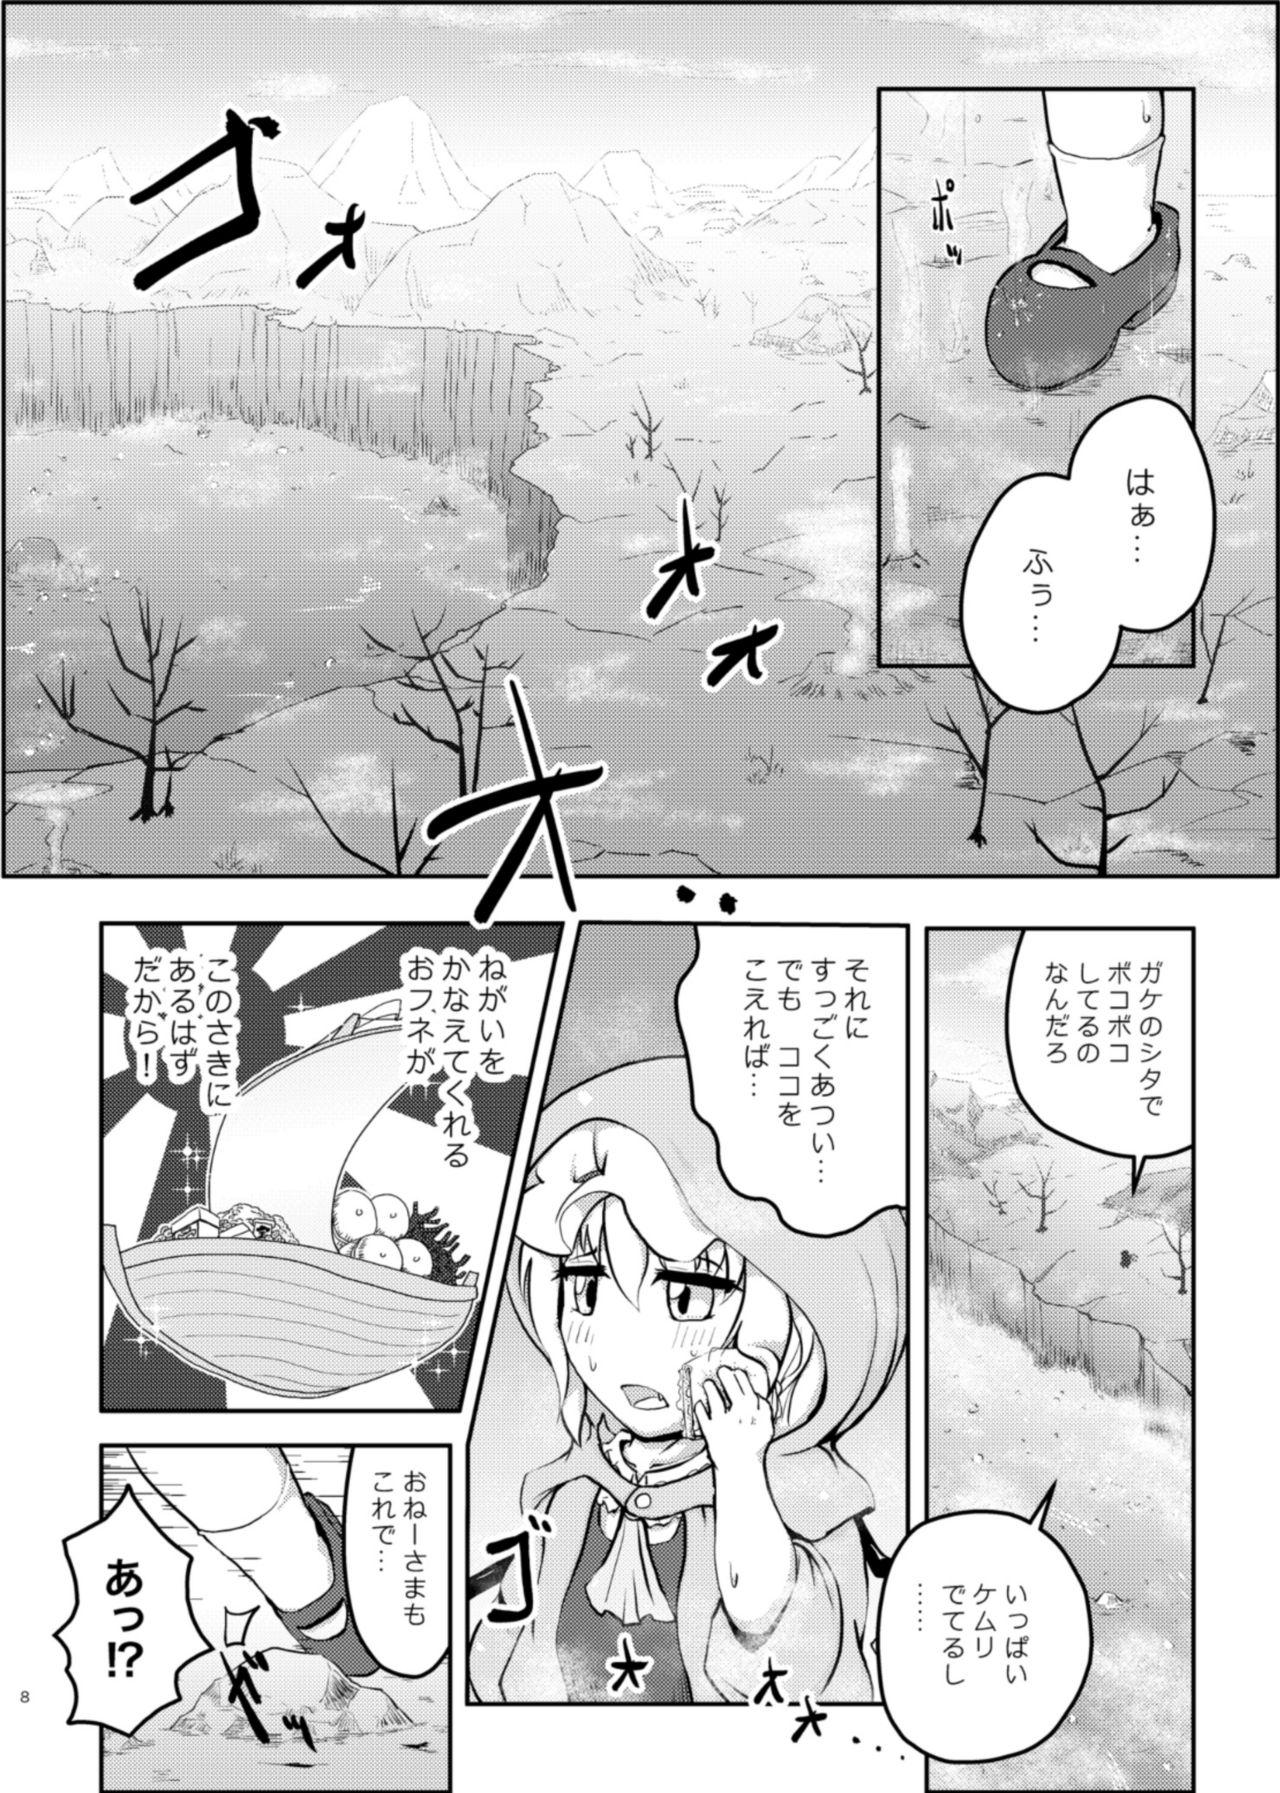 Reverse Scarlet Conflict 2 - Touhou project Joi - Page 8